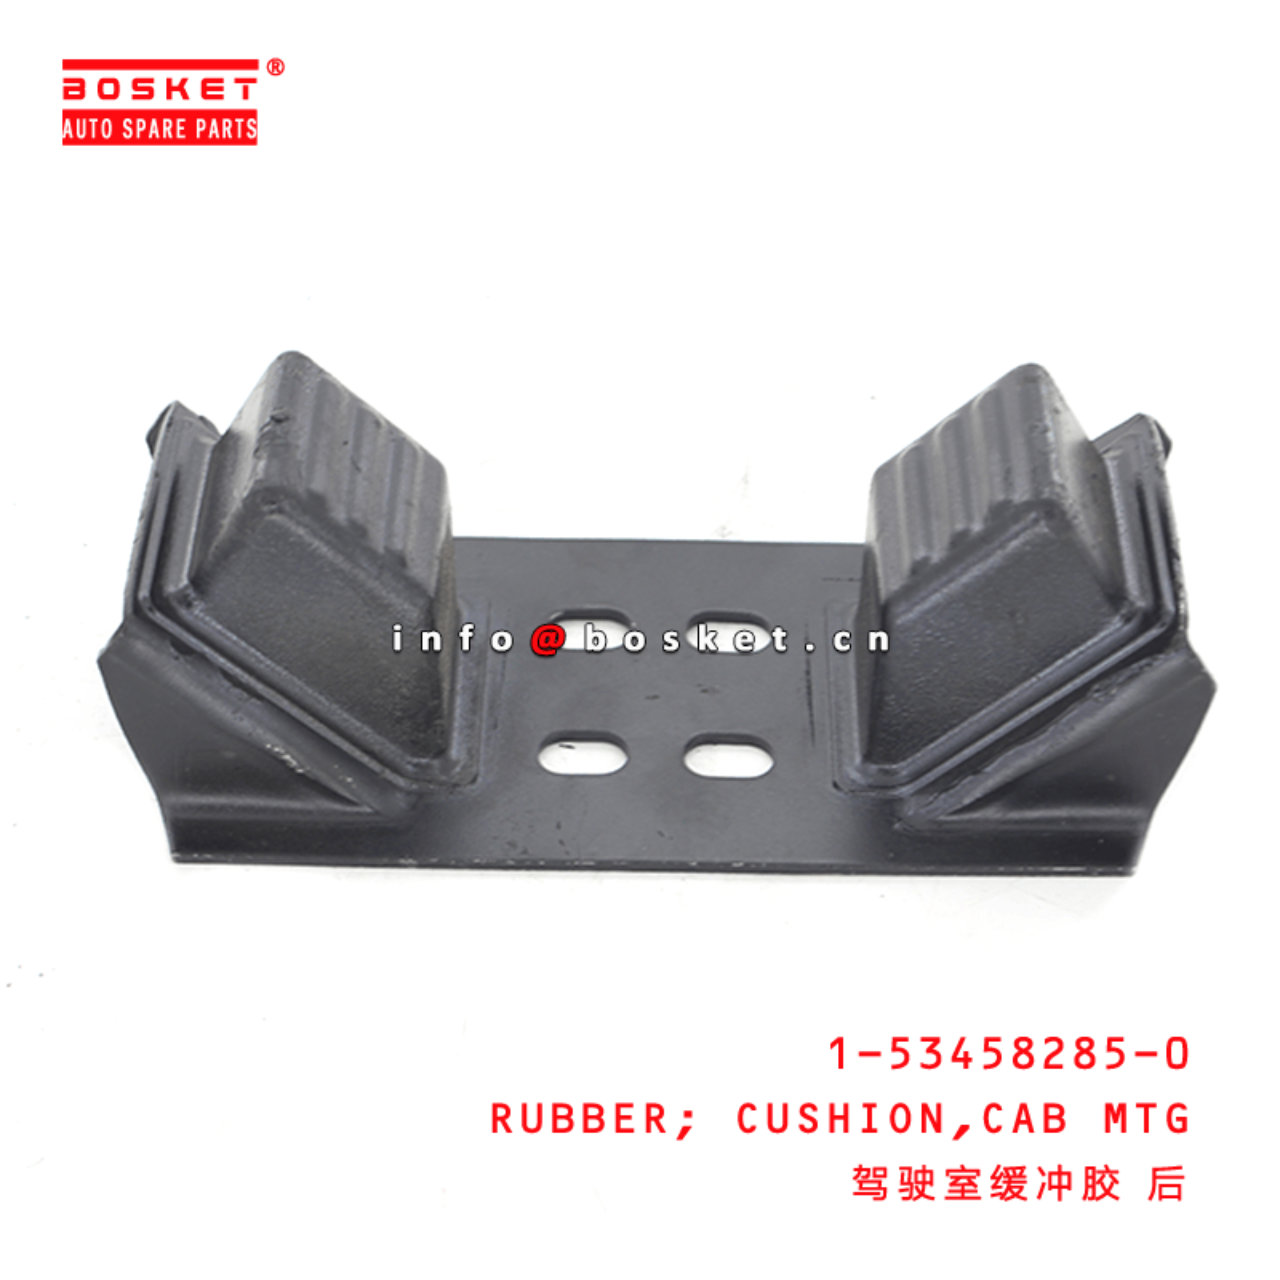 1-53458285-0 Cab Mounting Cushion Rubber 1534582850 Suitable for ISUZU FVR34 6HK1